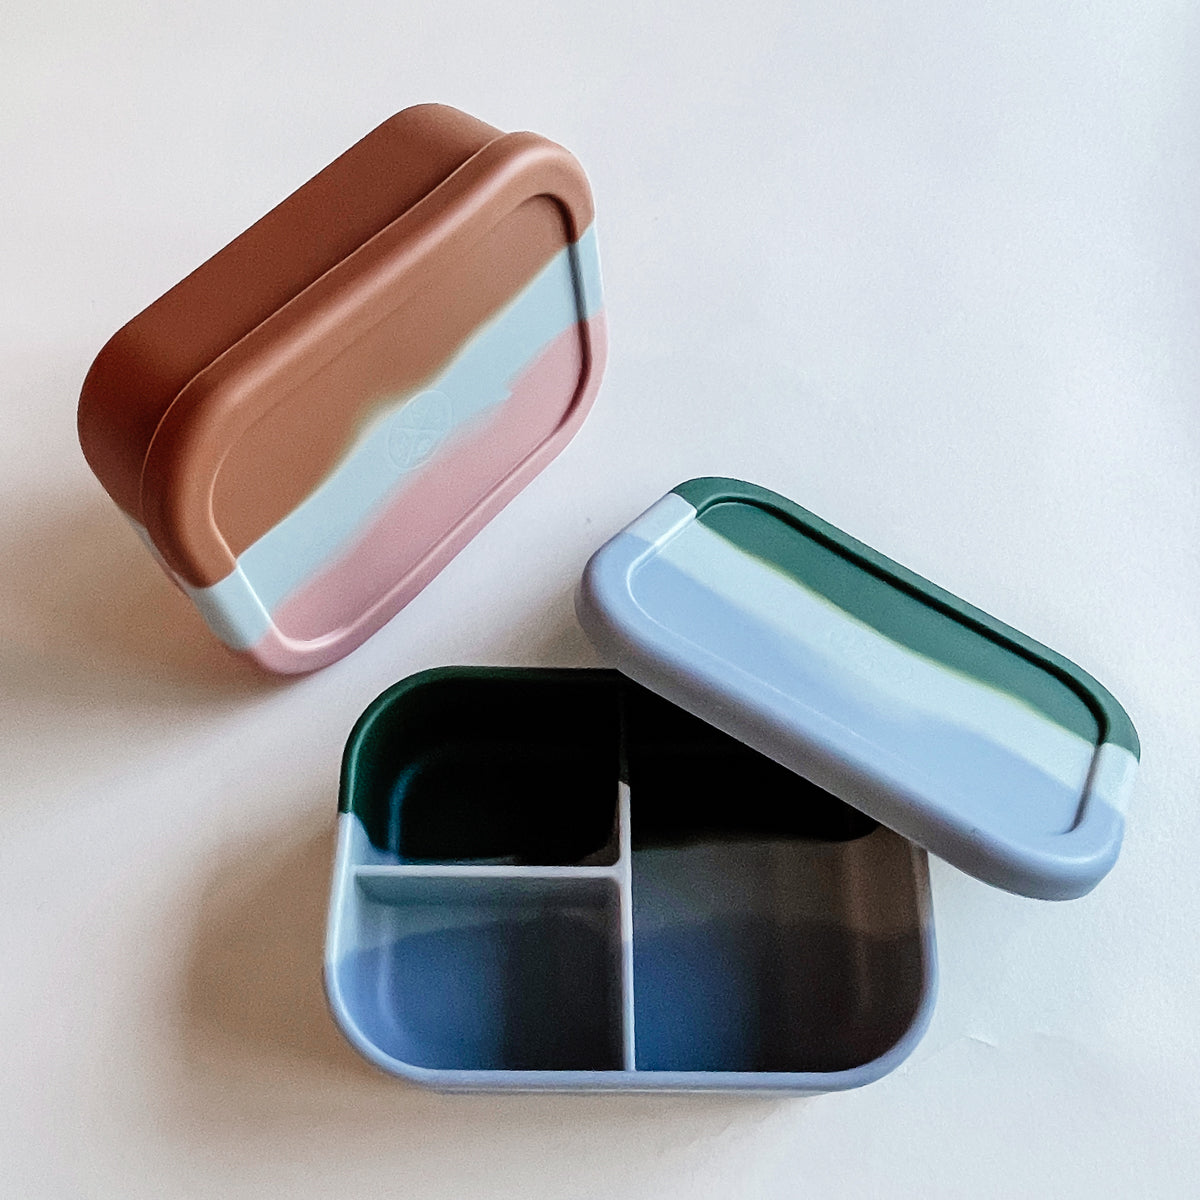 Silicone Bento Lunch & Snack Box for kids and adults by MKS Miminoo